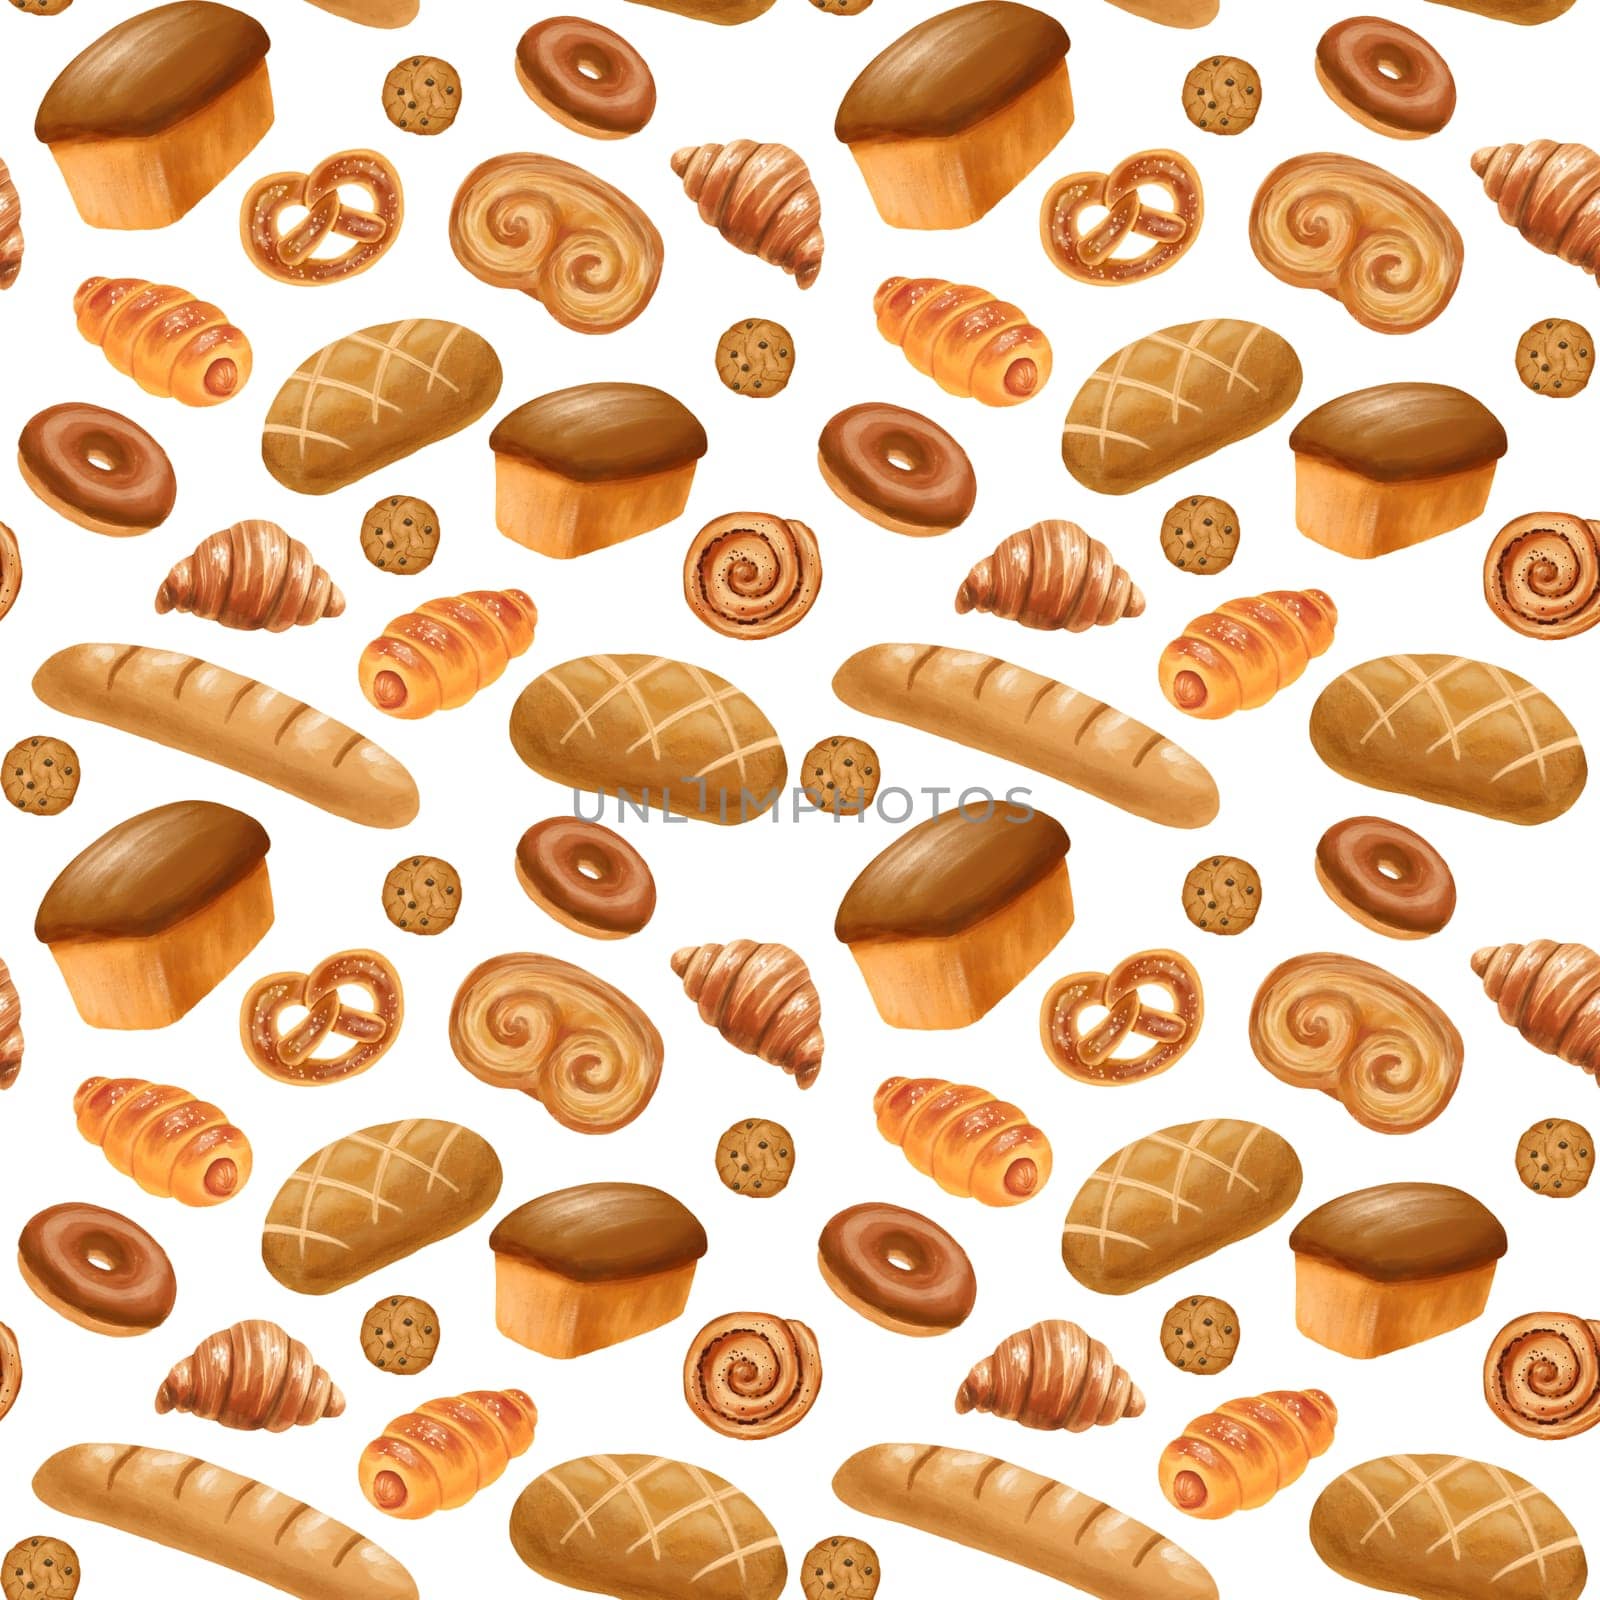 Seamless pattern with baking. Hand drawn illustrations of sweet pastries and cookies on white background.